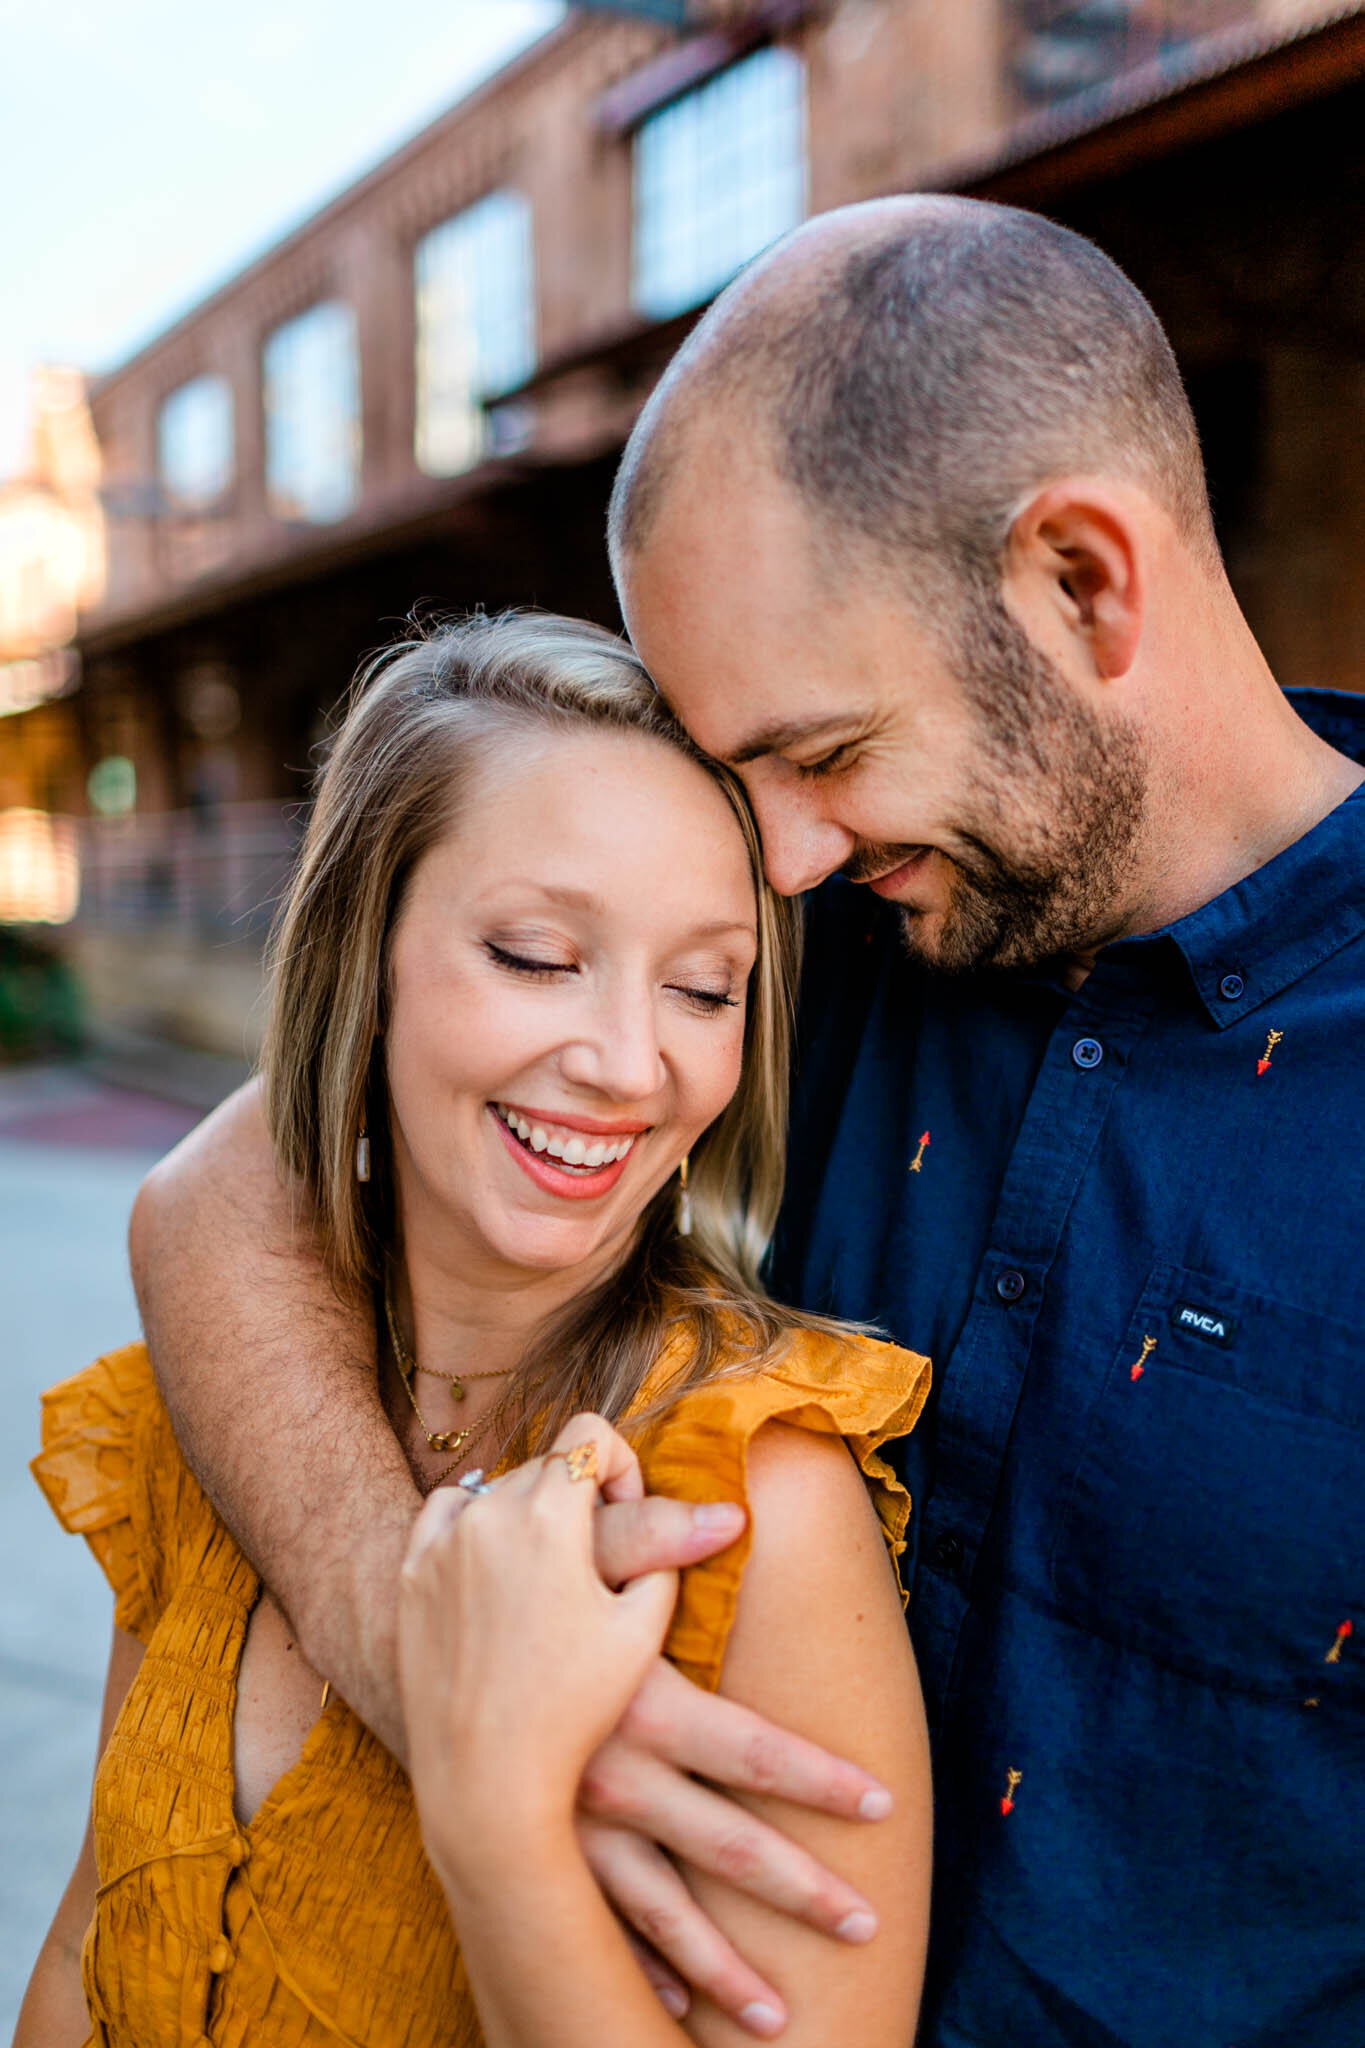 Durham Family Photographer | By G. Lin Photography | Man and woman embracing one another and smiling